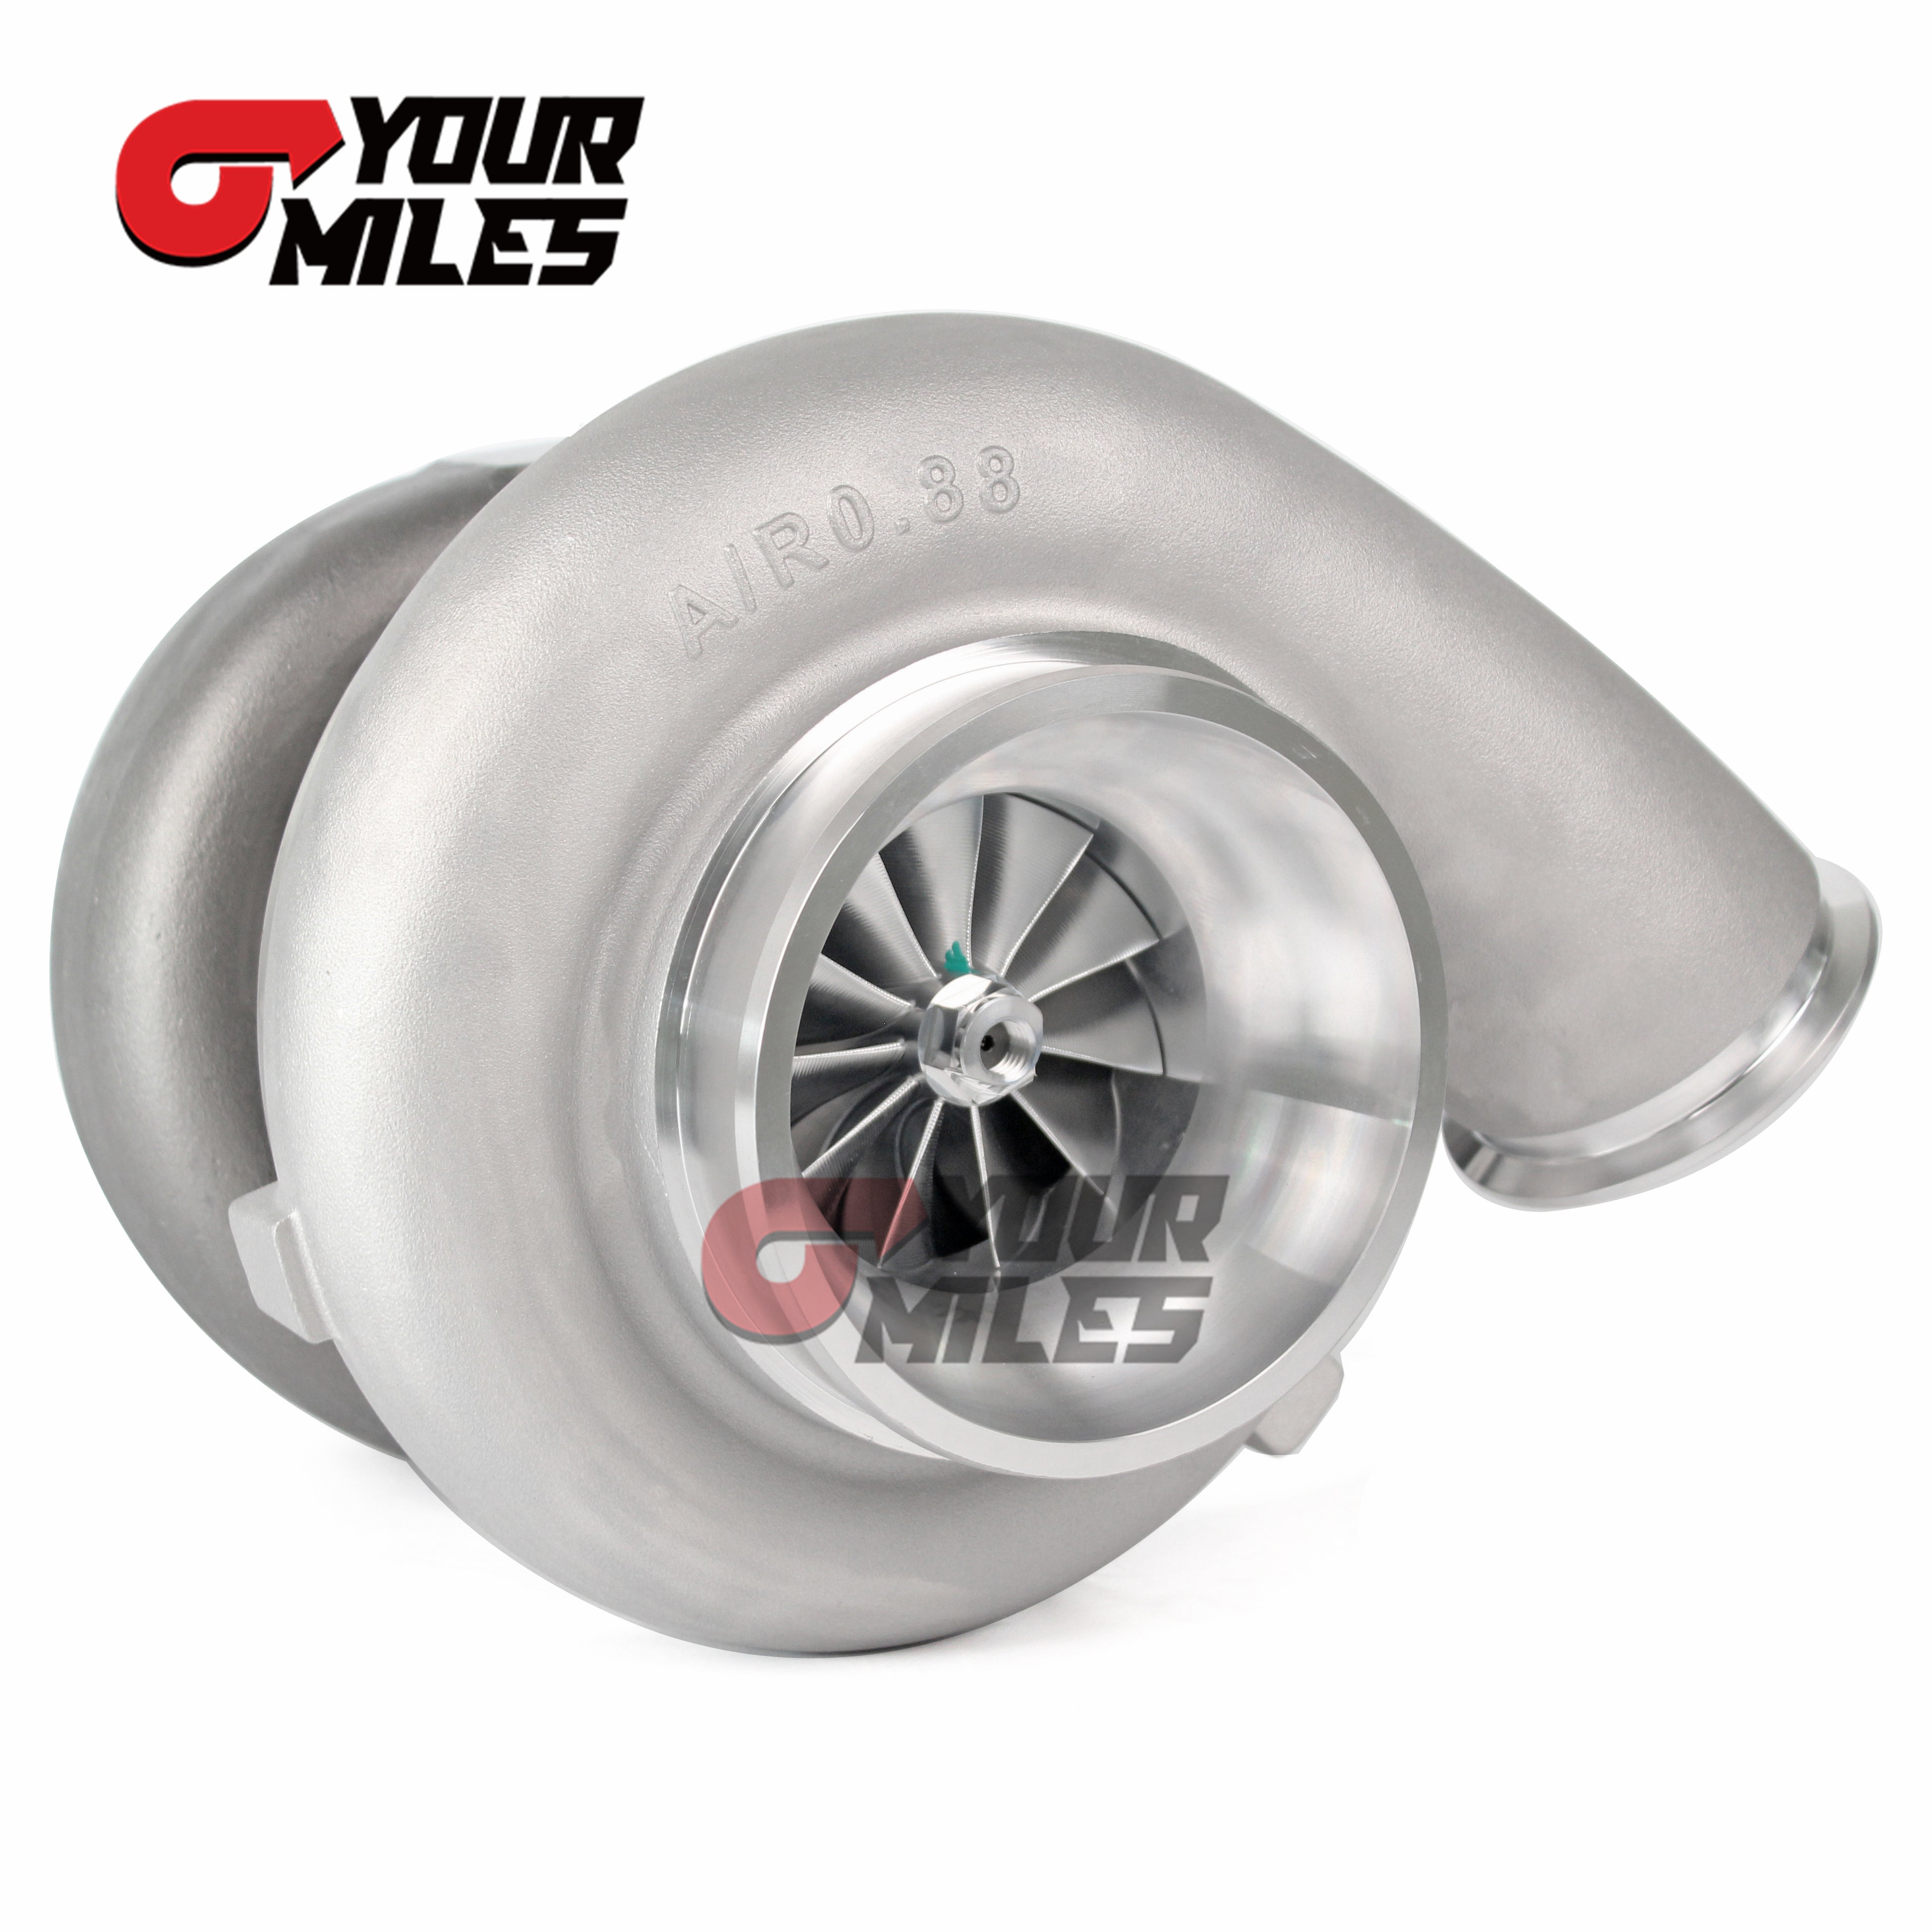 Yourmiles GTX5533R 98mm Turbocharger Up to 2500HP